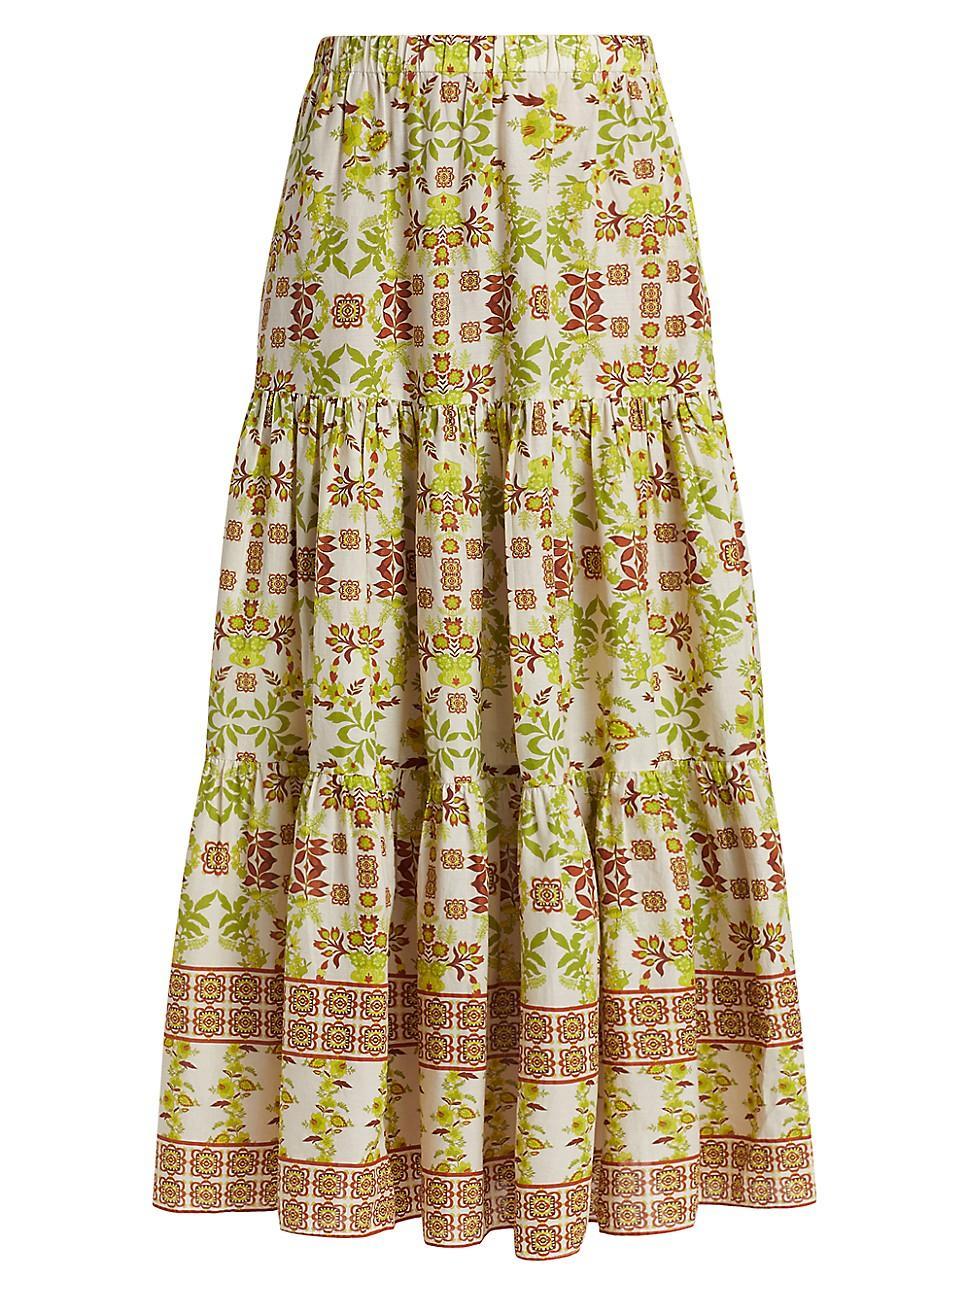 Womens Melanie Floral Maxi Skirt Product Image